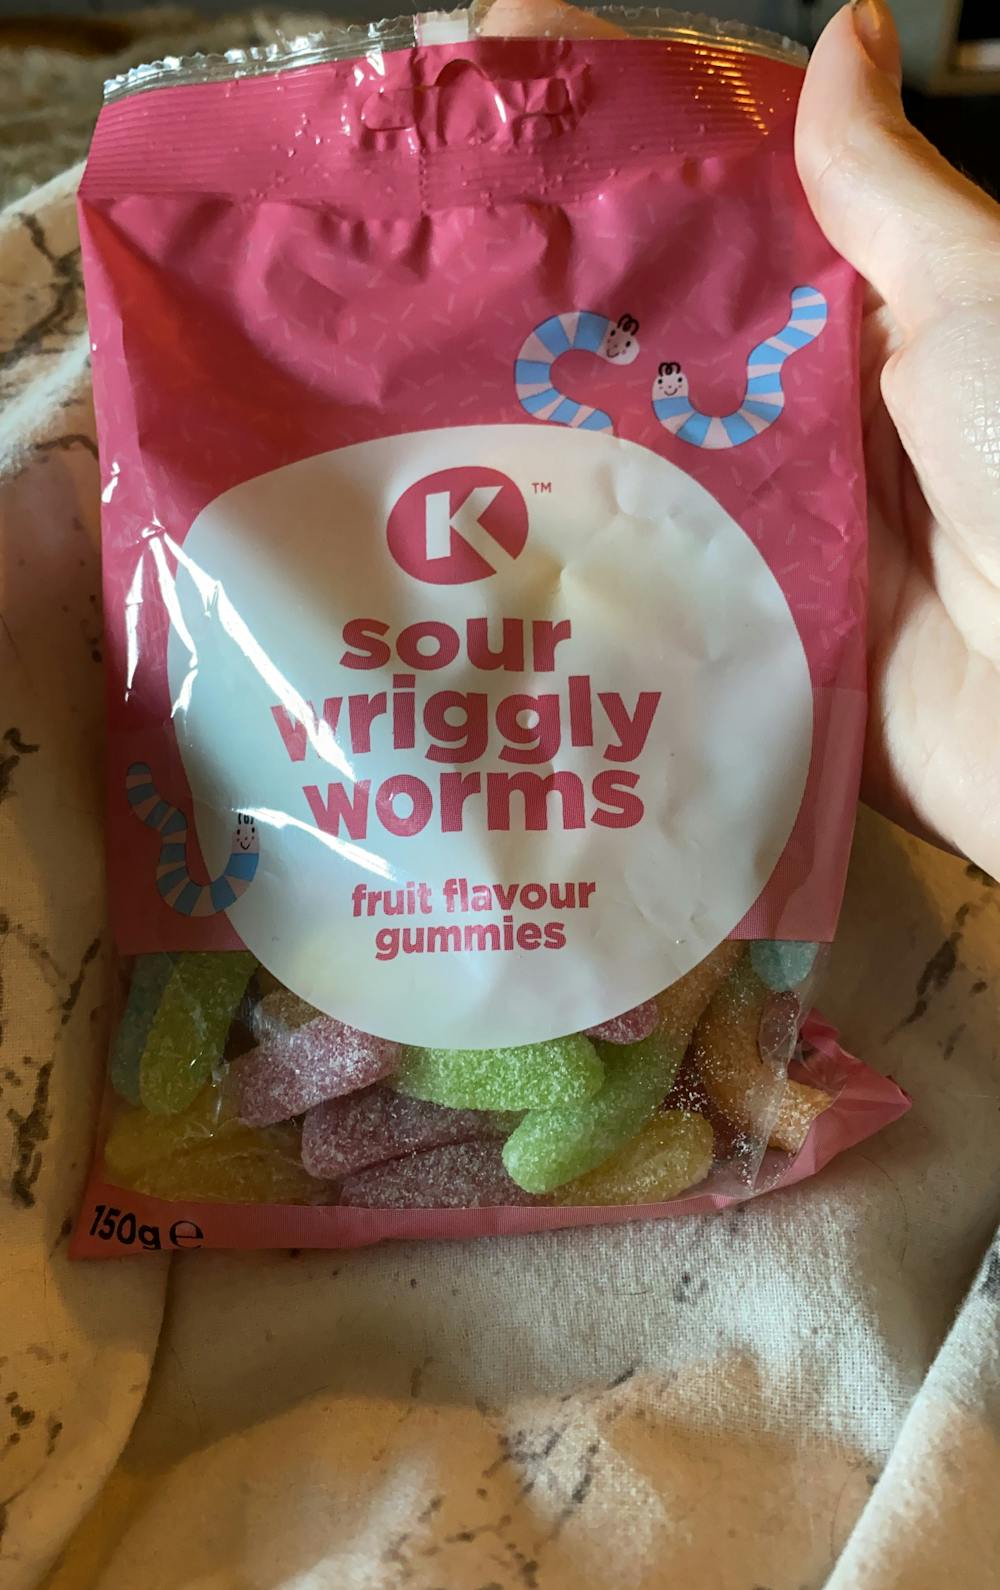 Sour wriggly worms, K